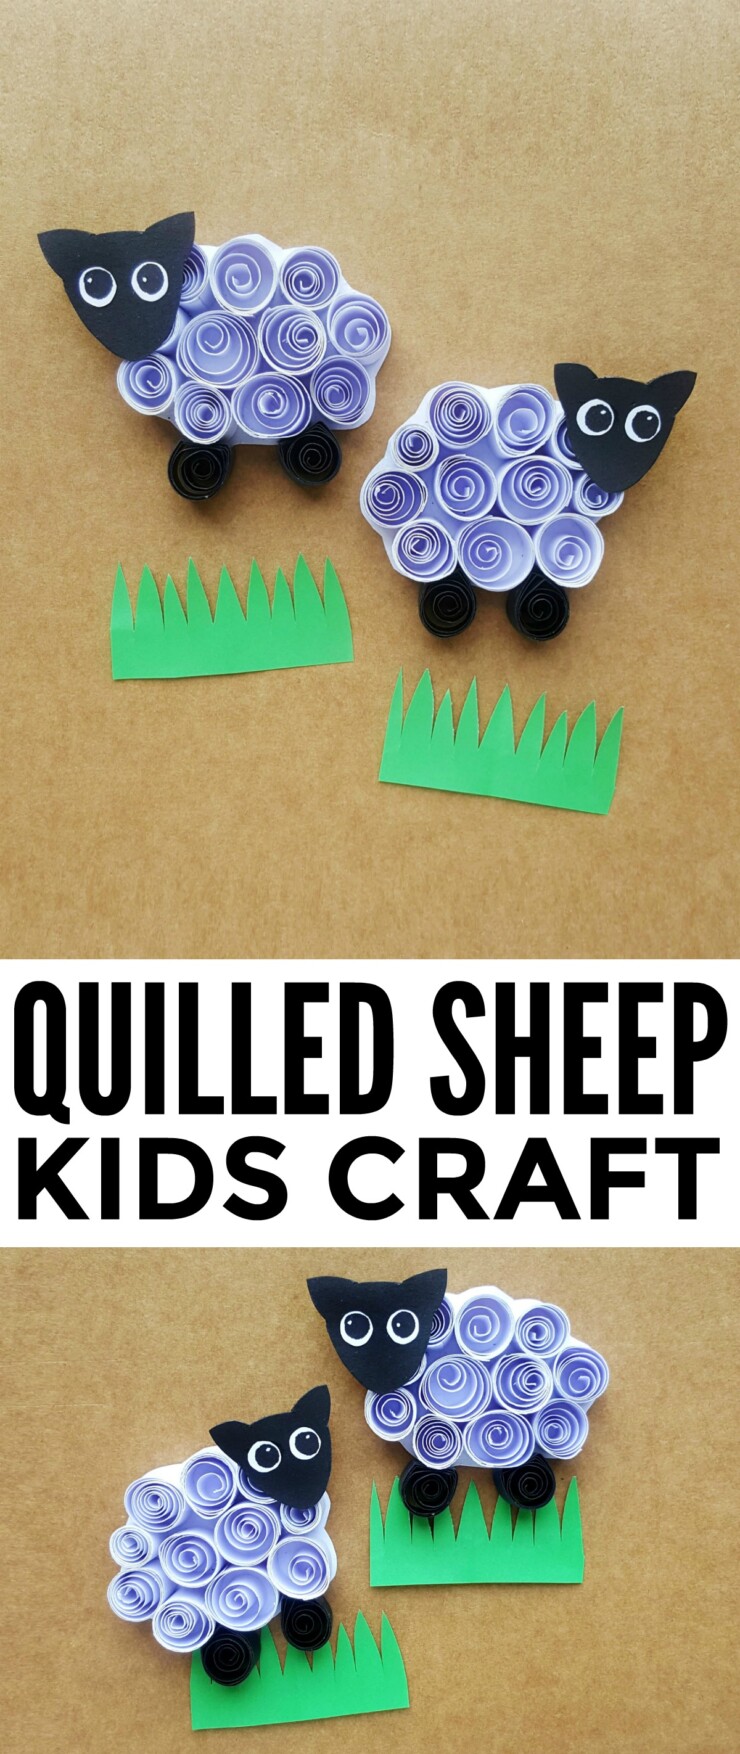 Kids will love making these cute little Quilled Paper Sheep as their next craft project. Use them on cards, glue them onto popsicle sticks to make bookmarks, turn them into magnets… the possibilities for these little cuties are endless!